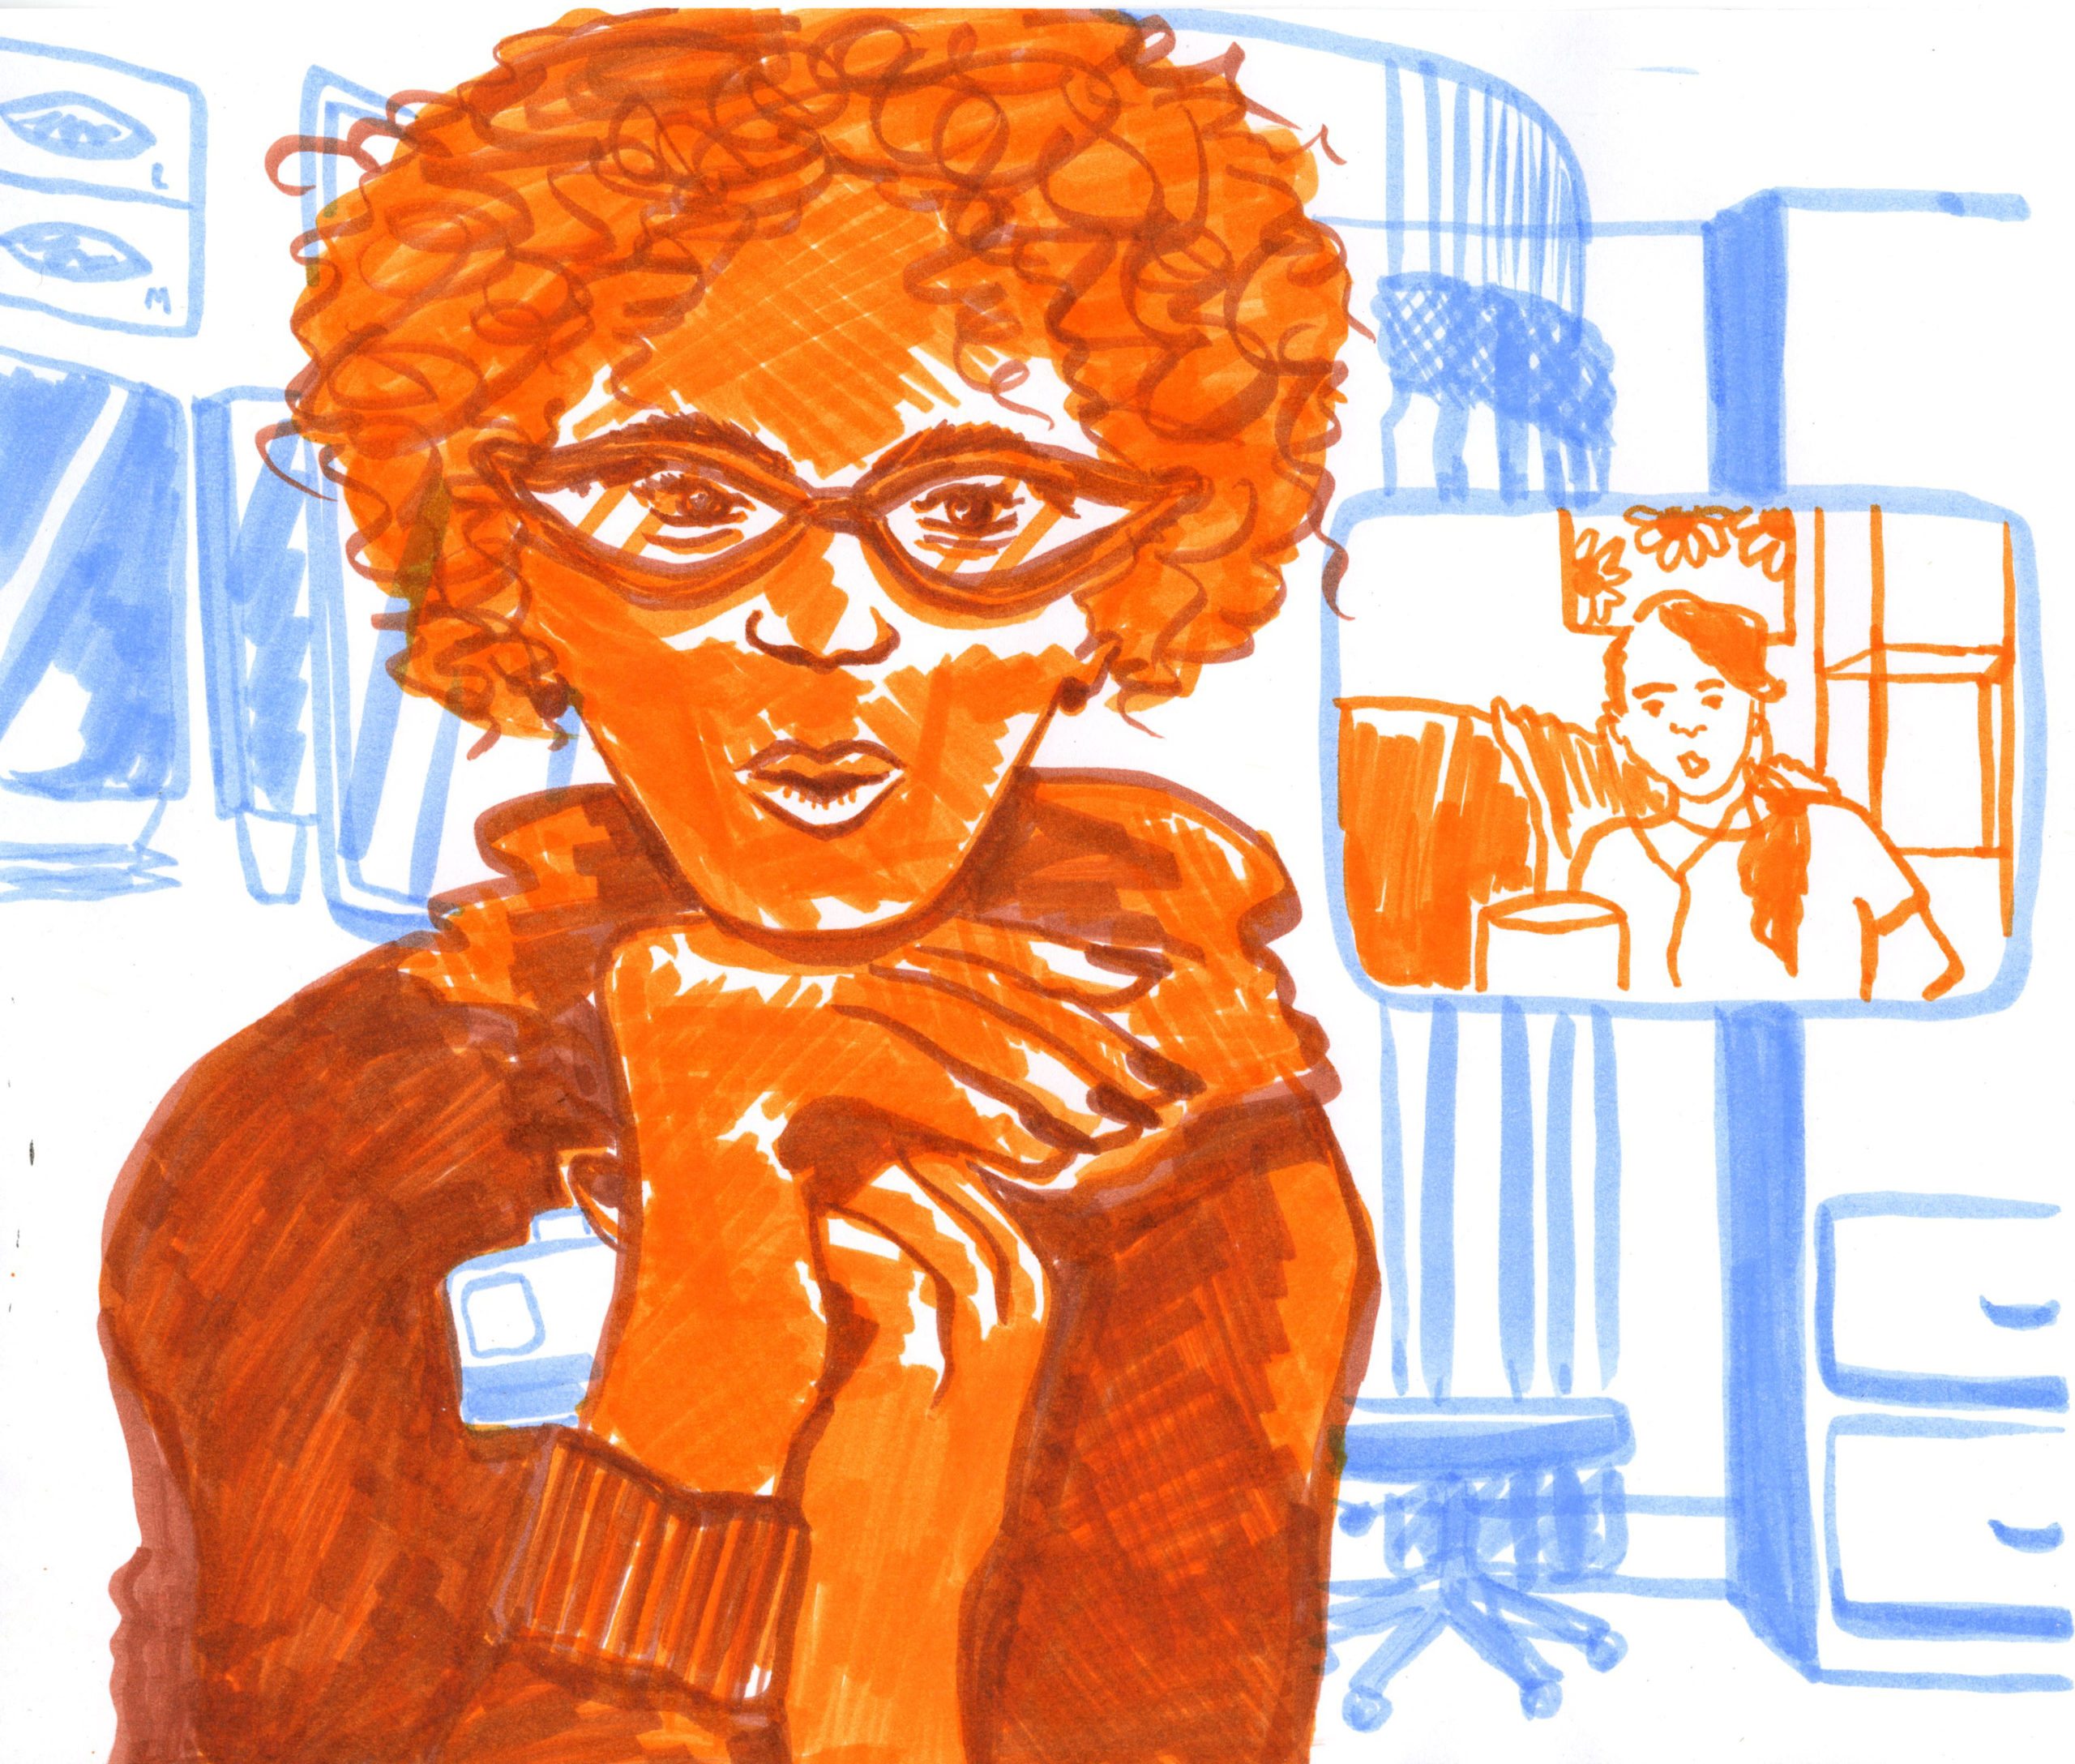 hand drawn illustration in orange and blue of person with short curly hair and glasses having a video chat with another person.